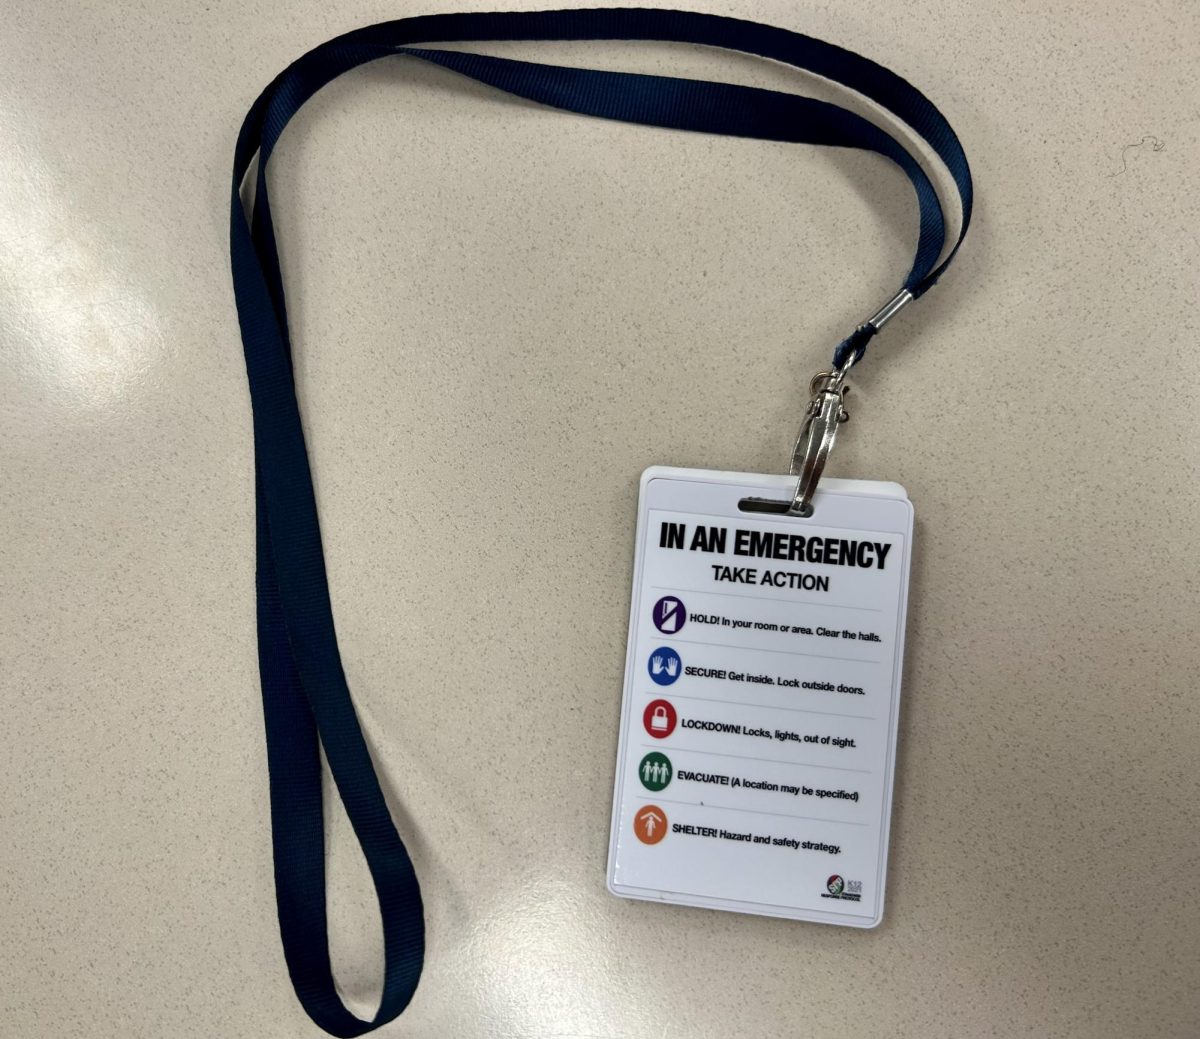 Burroughs+personnel+are+each+given+a+lanyard+with+the+new+safetry+infomation.